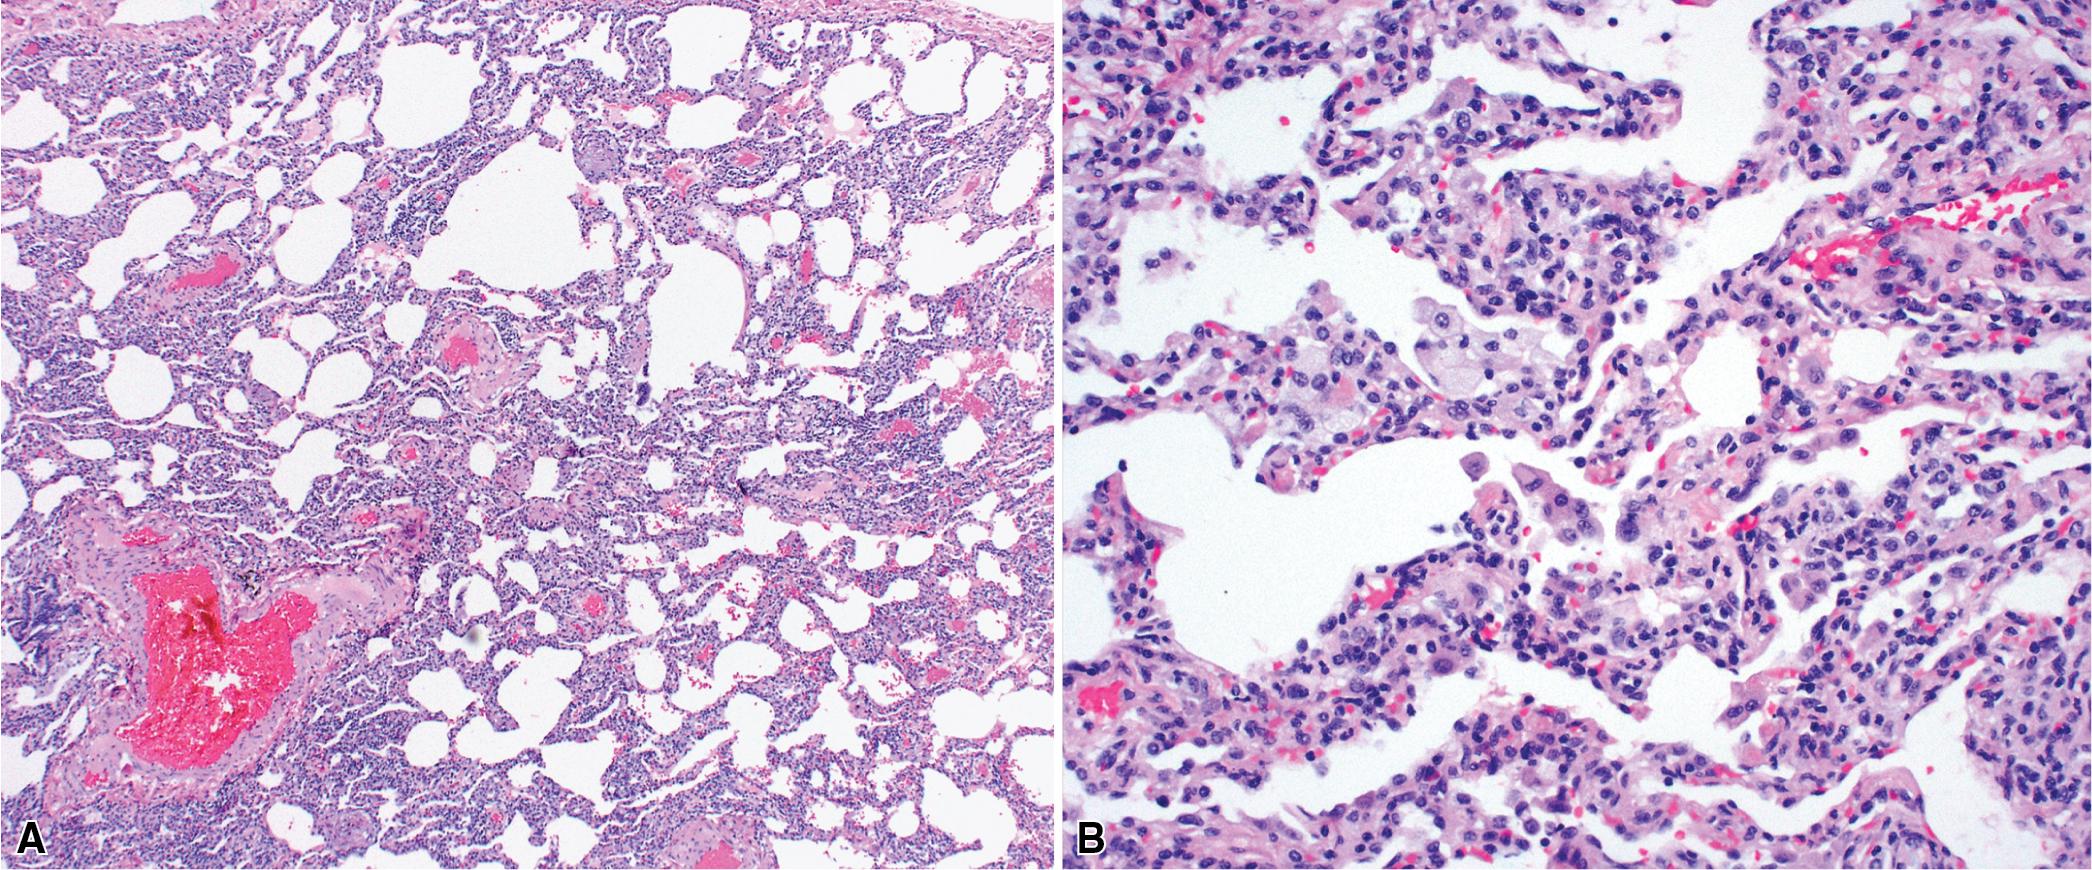 Figure 8.13, Nonspecific interstitial pneumonia (NSIP). (A) The chronic inflammatory infiltration in NSIP is diffuse and relatively uniform, mainly involving the alveolar walls. (B) Lymphocytes and plasma cells are the dominant cells.